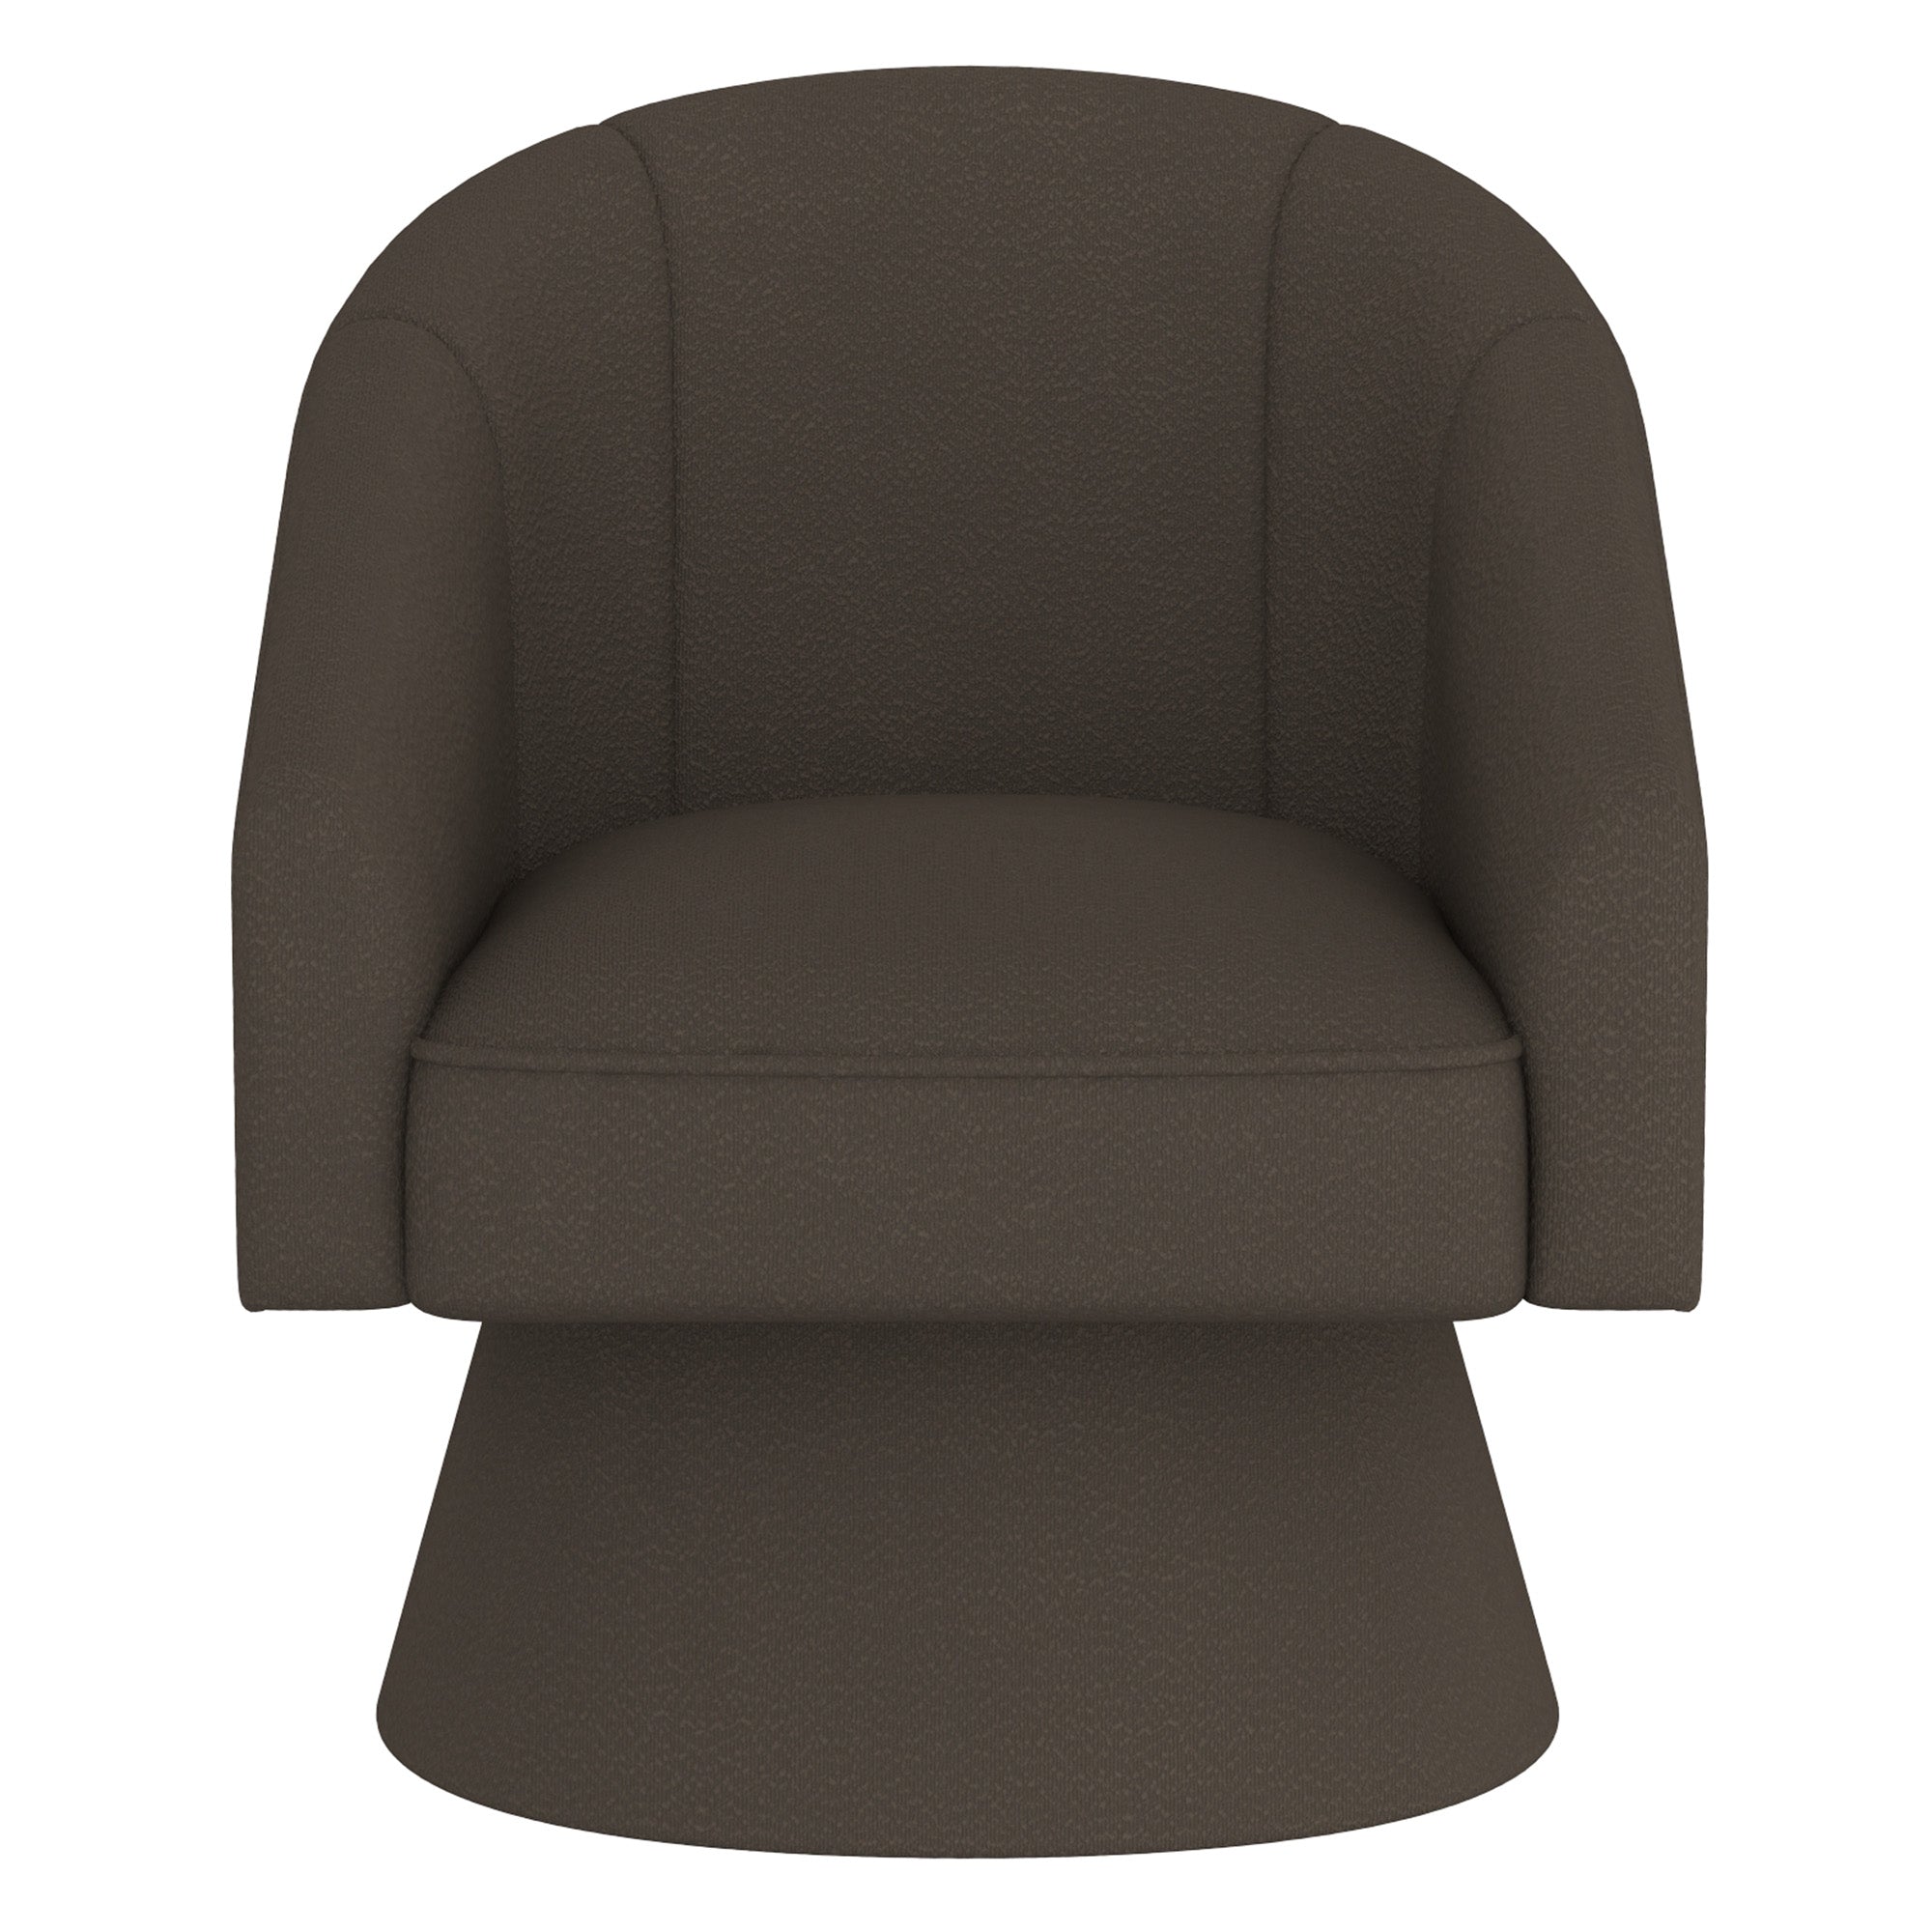 TILSY-ACCENT CHAIR-CHARCOAL